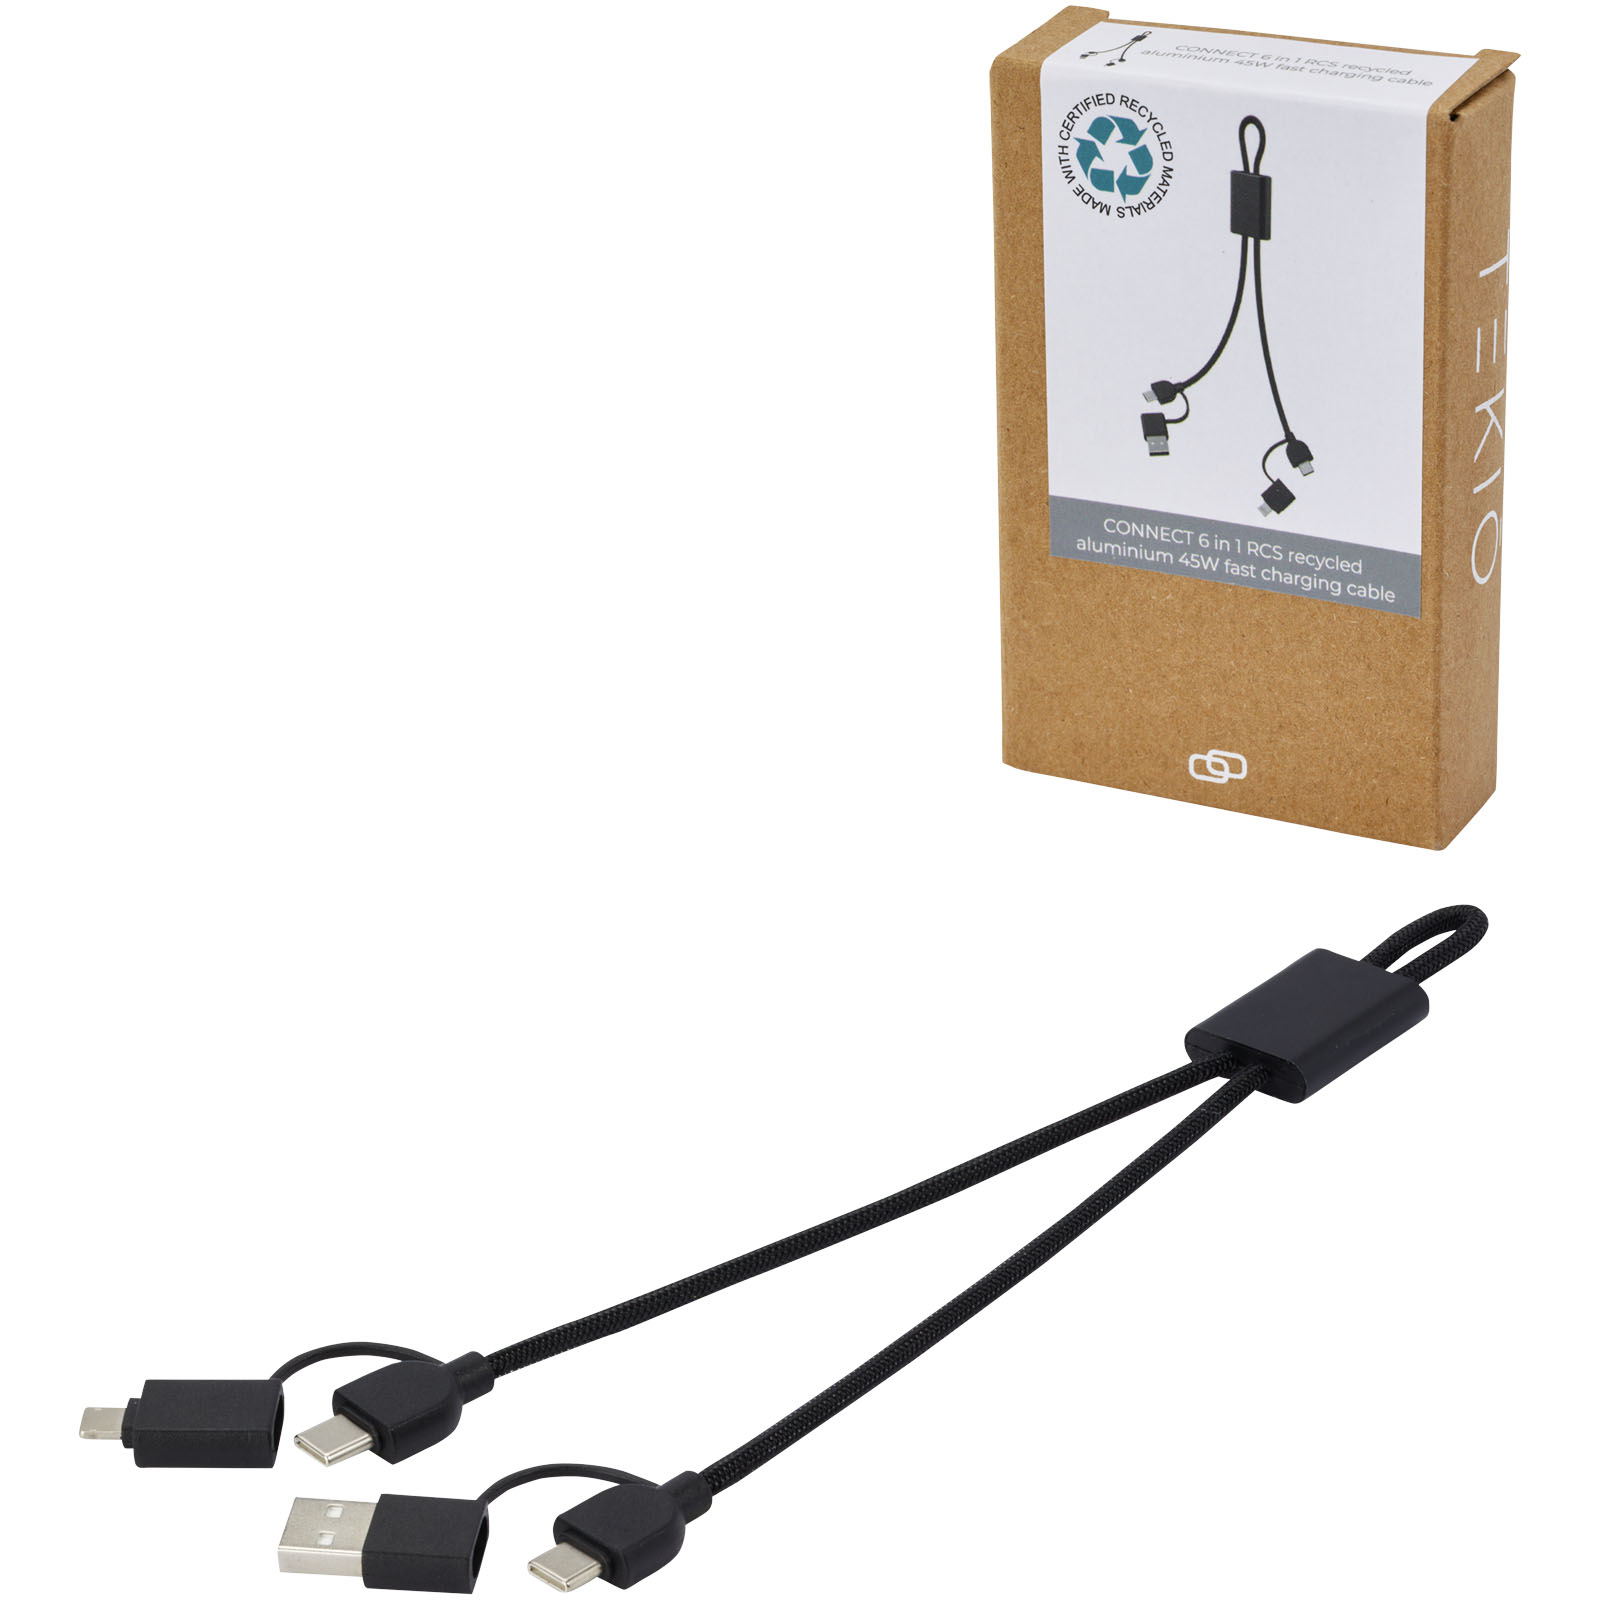 Advertising Cables - Connect 6-in-1 RCS recycled aluminium 45W quick charge & data transfer cable - 0